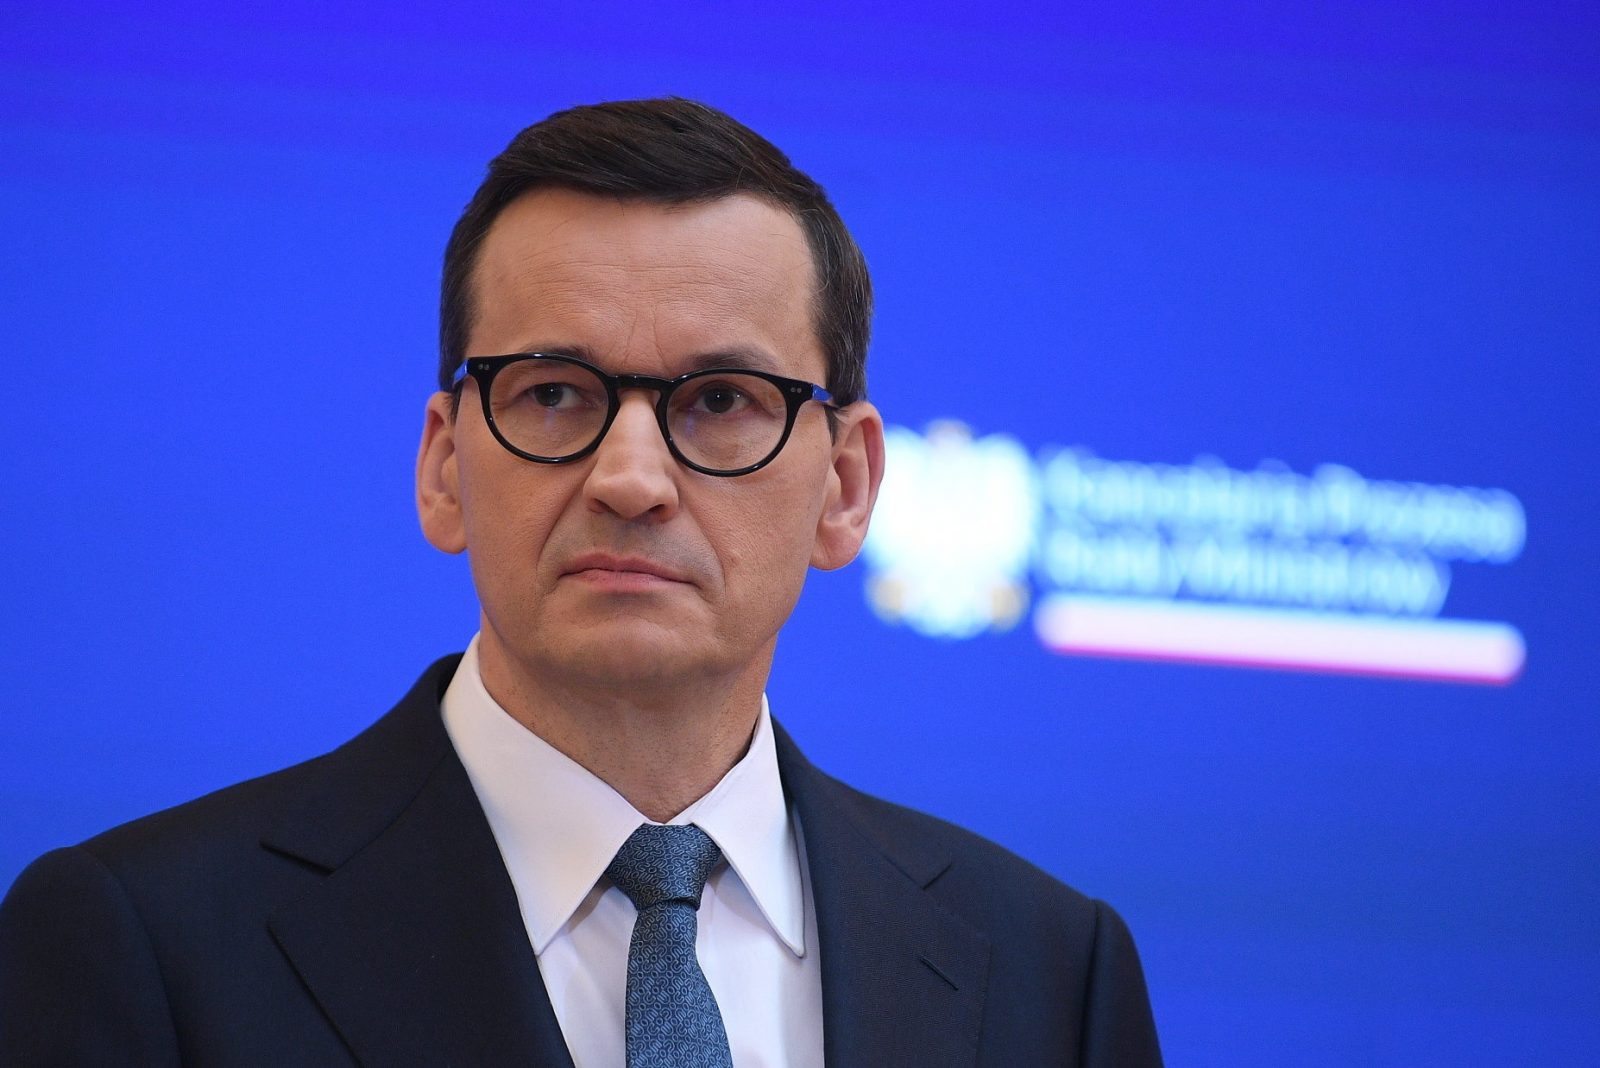 epa10548821 Polish Prime Minister Mateusz Morawiecki attends a press conference at the Chancellery of the Prime Minister in Warsaw, Poland, 29 March 2023. Poland will increase ammunition production under a National Munitions Programme, the prime minister has said. Mateusz Morawiecki announced the decision after it had been passed by the government. He told a press conference that the programme, with a budget of close to PLN 2 billion (430 million EUR ), aimed to expand Poland's ammunition production in order to secure sufficient supplies for Ukraine.  EPA/Marcin Obara POLAND OUT